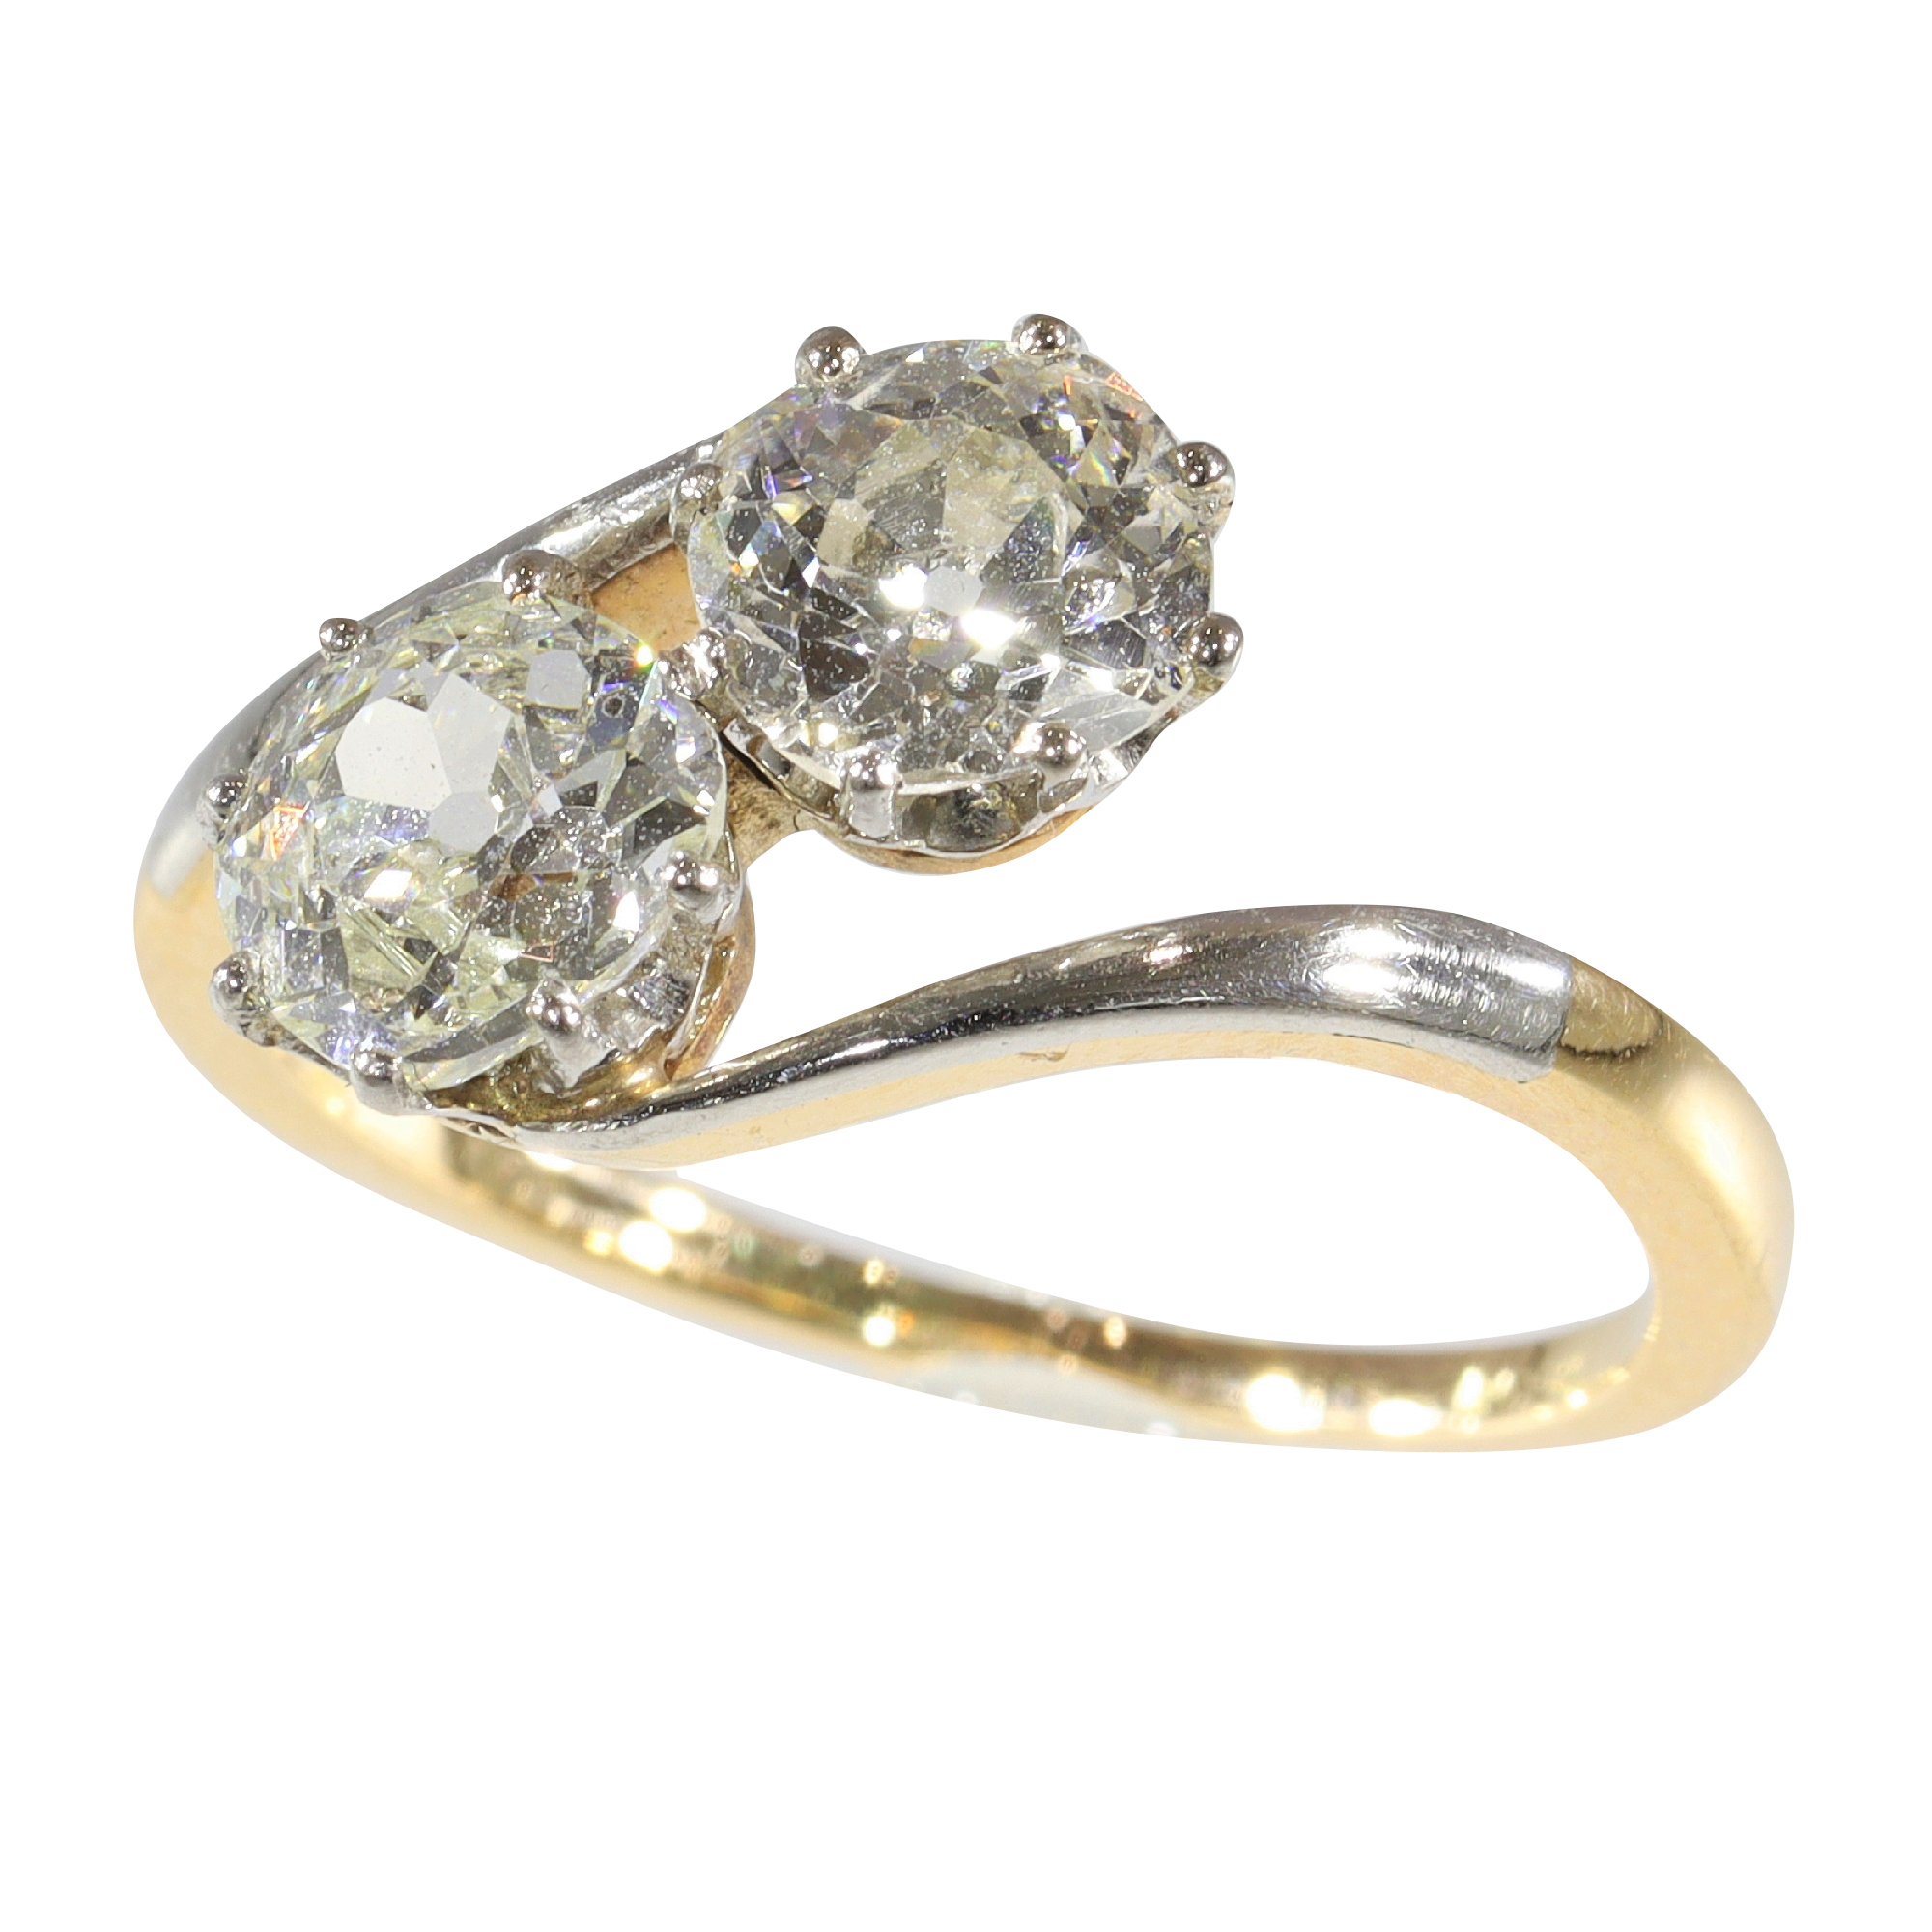 Legacy of Love: The Vintage 'Toi et Moi' Engagement Ring